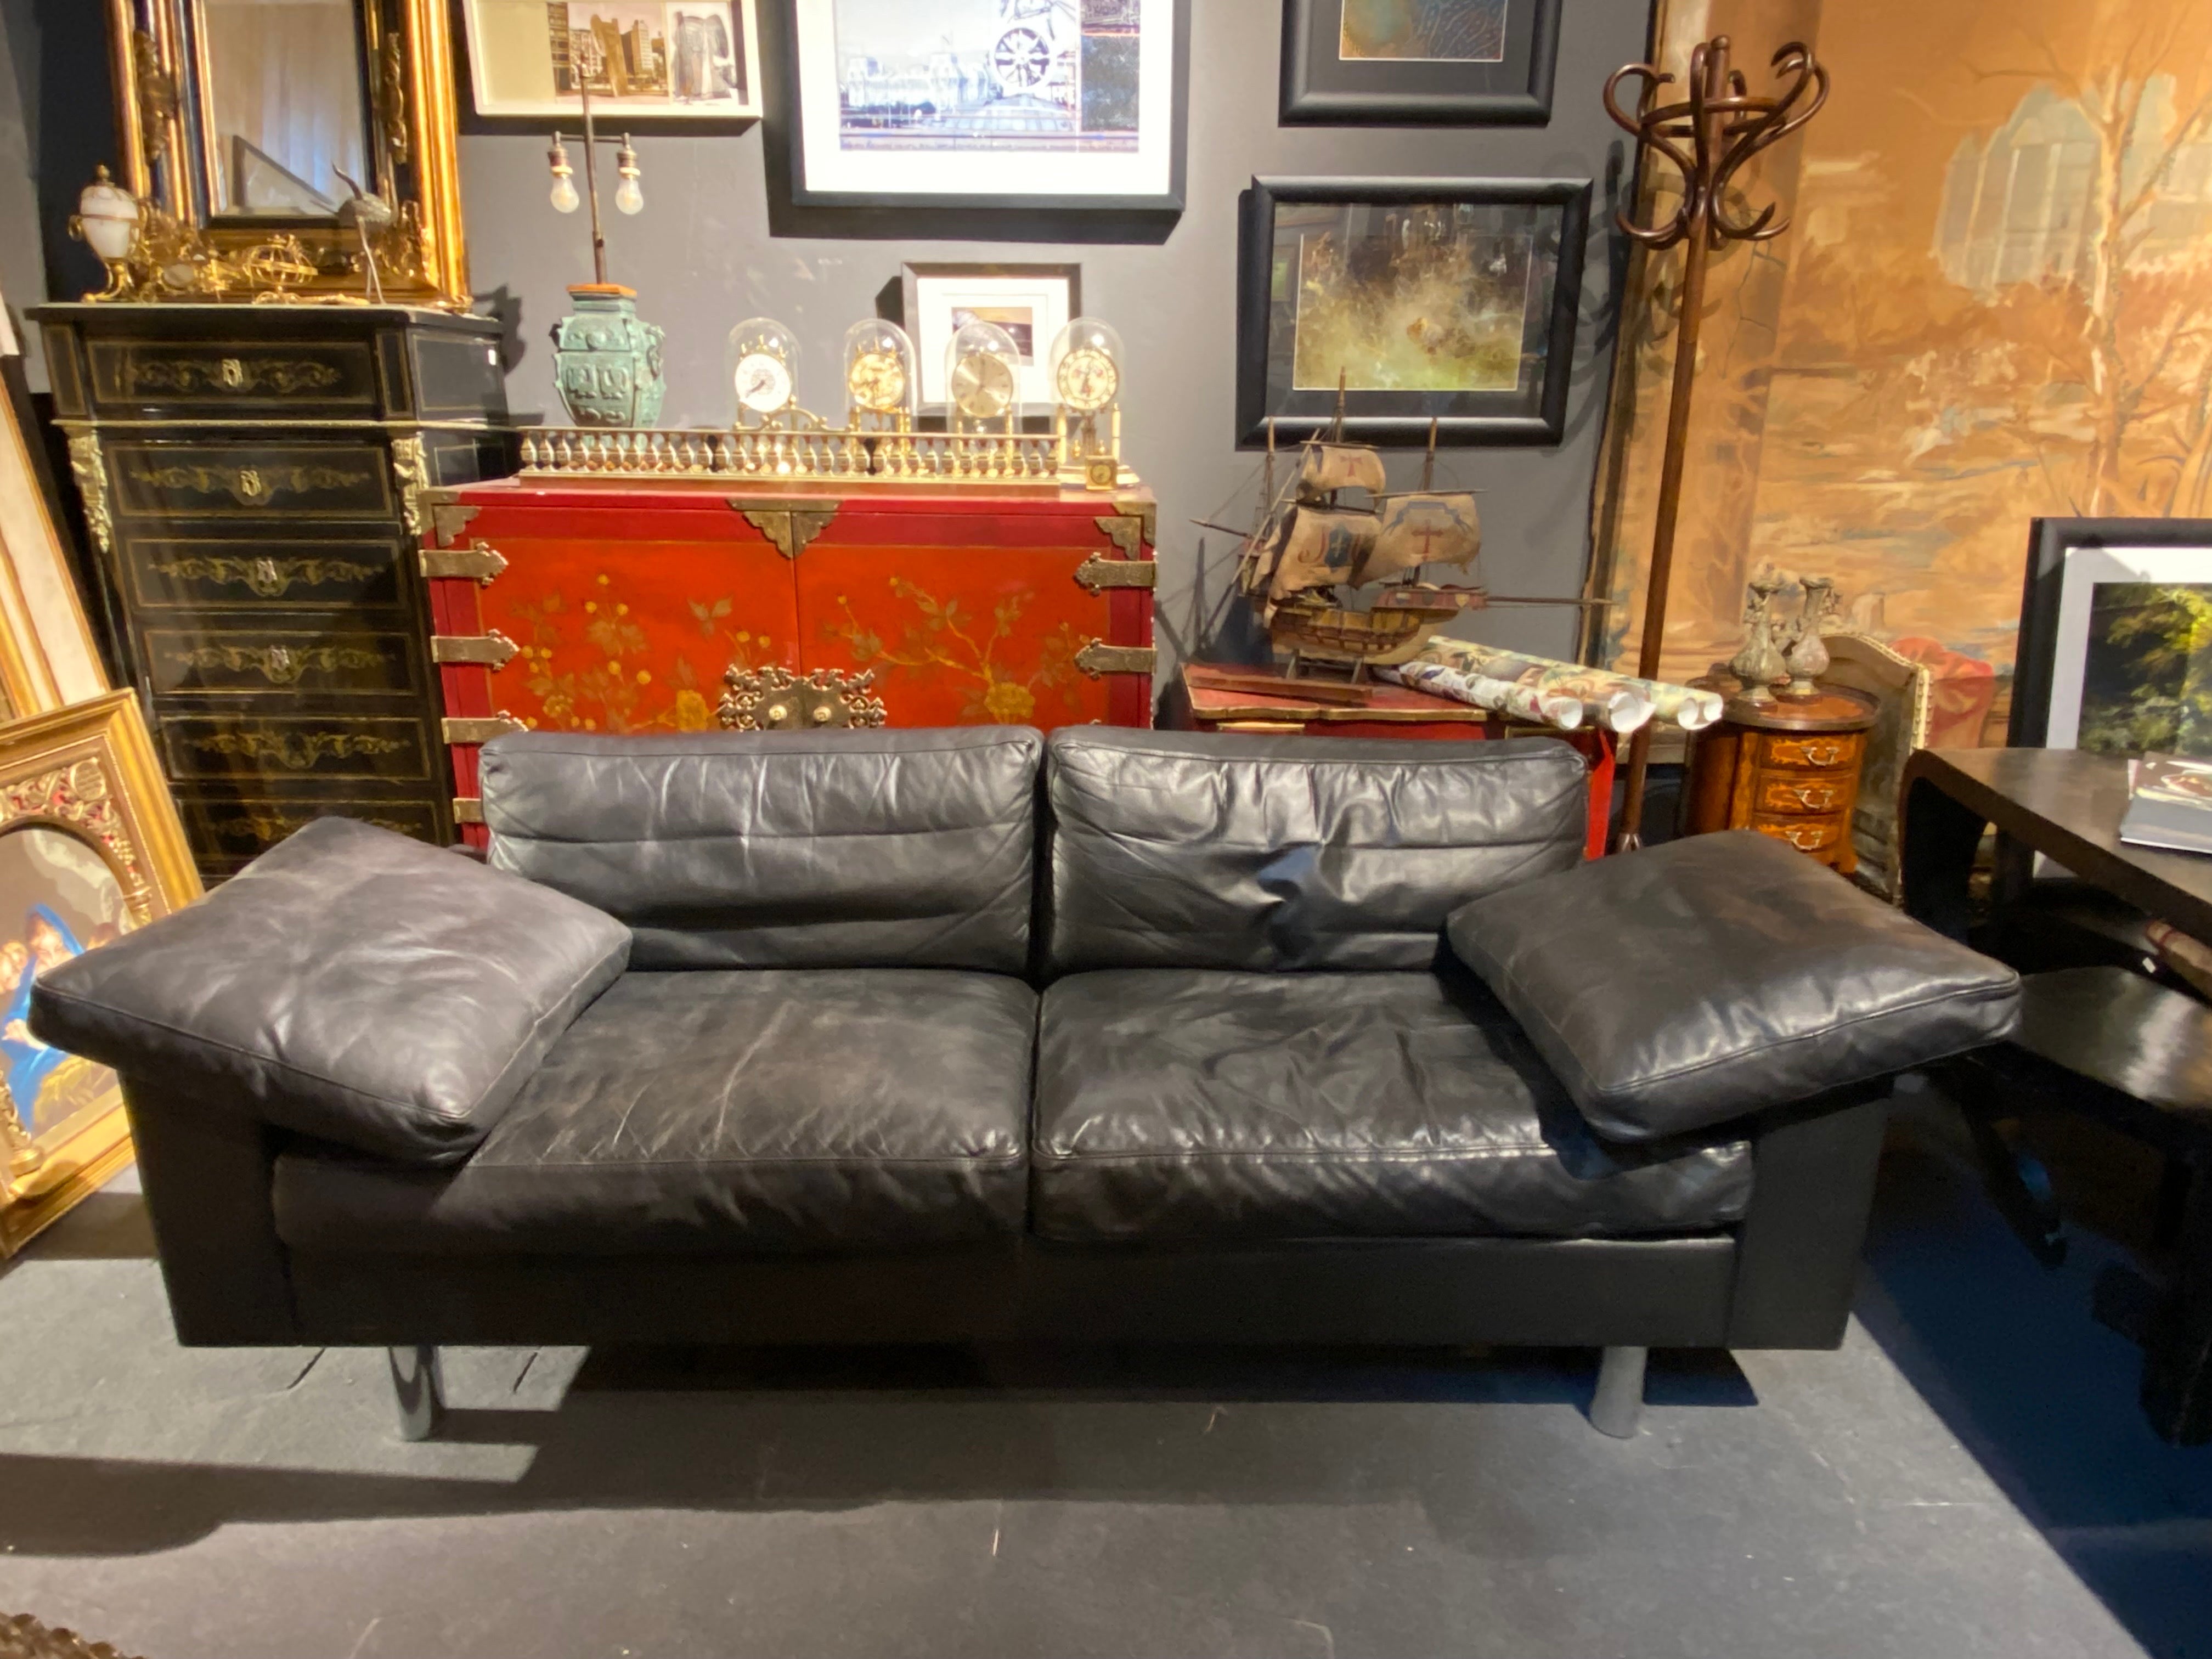 Danish sofa in dark grey leather from about 1970 made by Illums Bolighus. Very good vintage condition with minor signs of age and use.
Three-seater sofa with straight back and solid armrests on corner base with tubular legs in chromed metal.